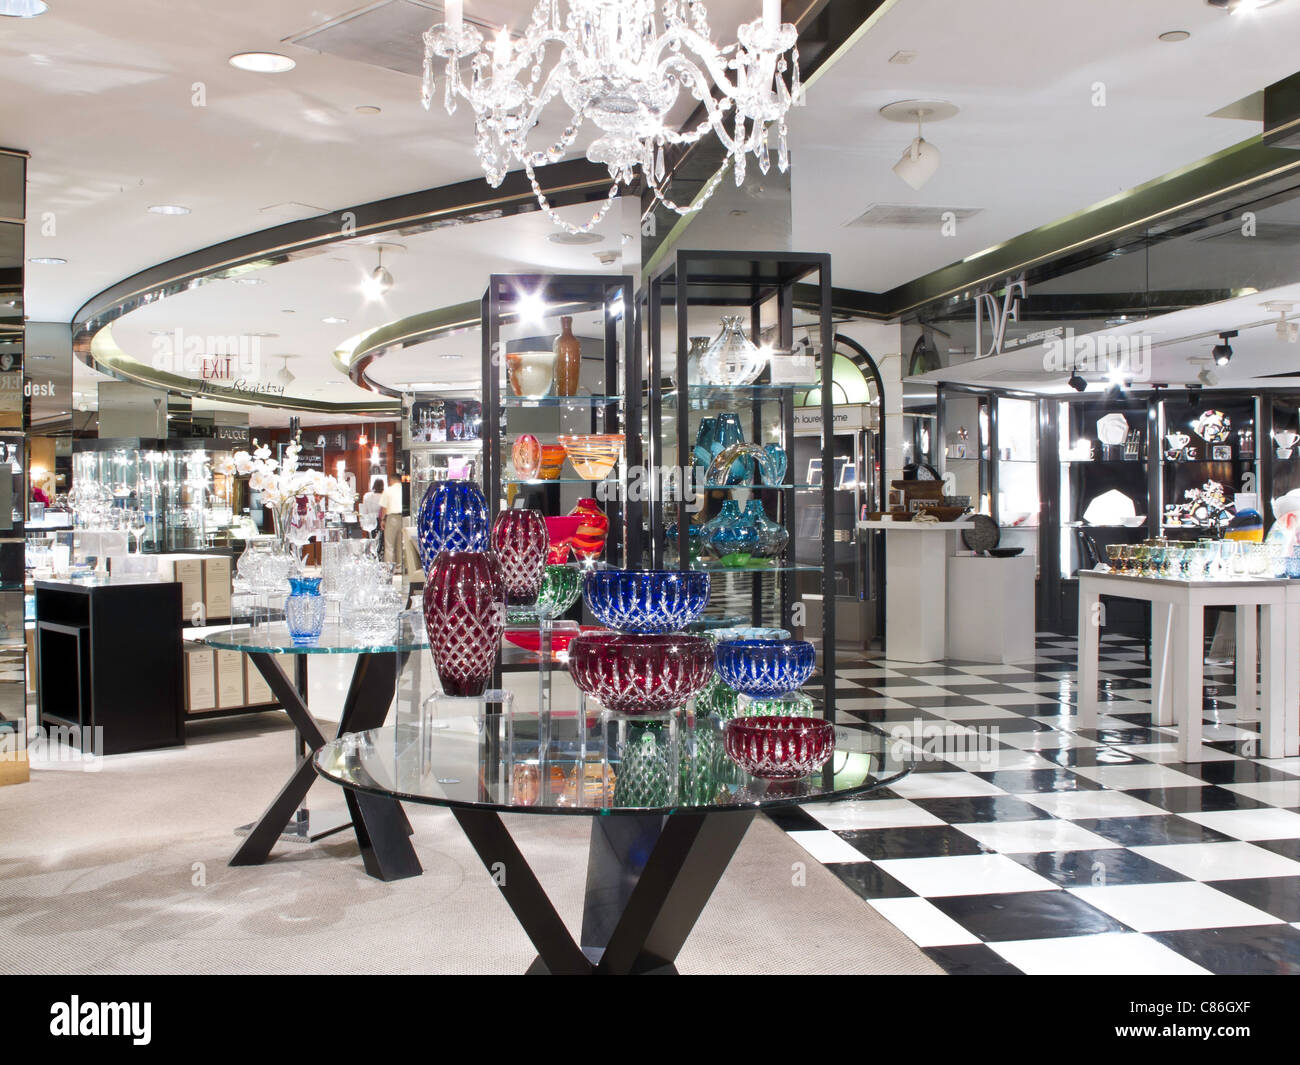 Cut Glass Display, Bloomingdale's Department Store Interior, NYC Stock Photo